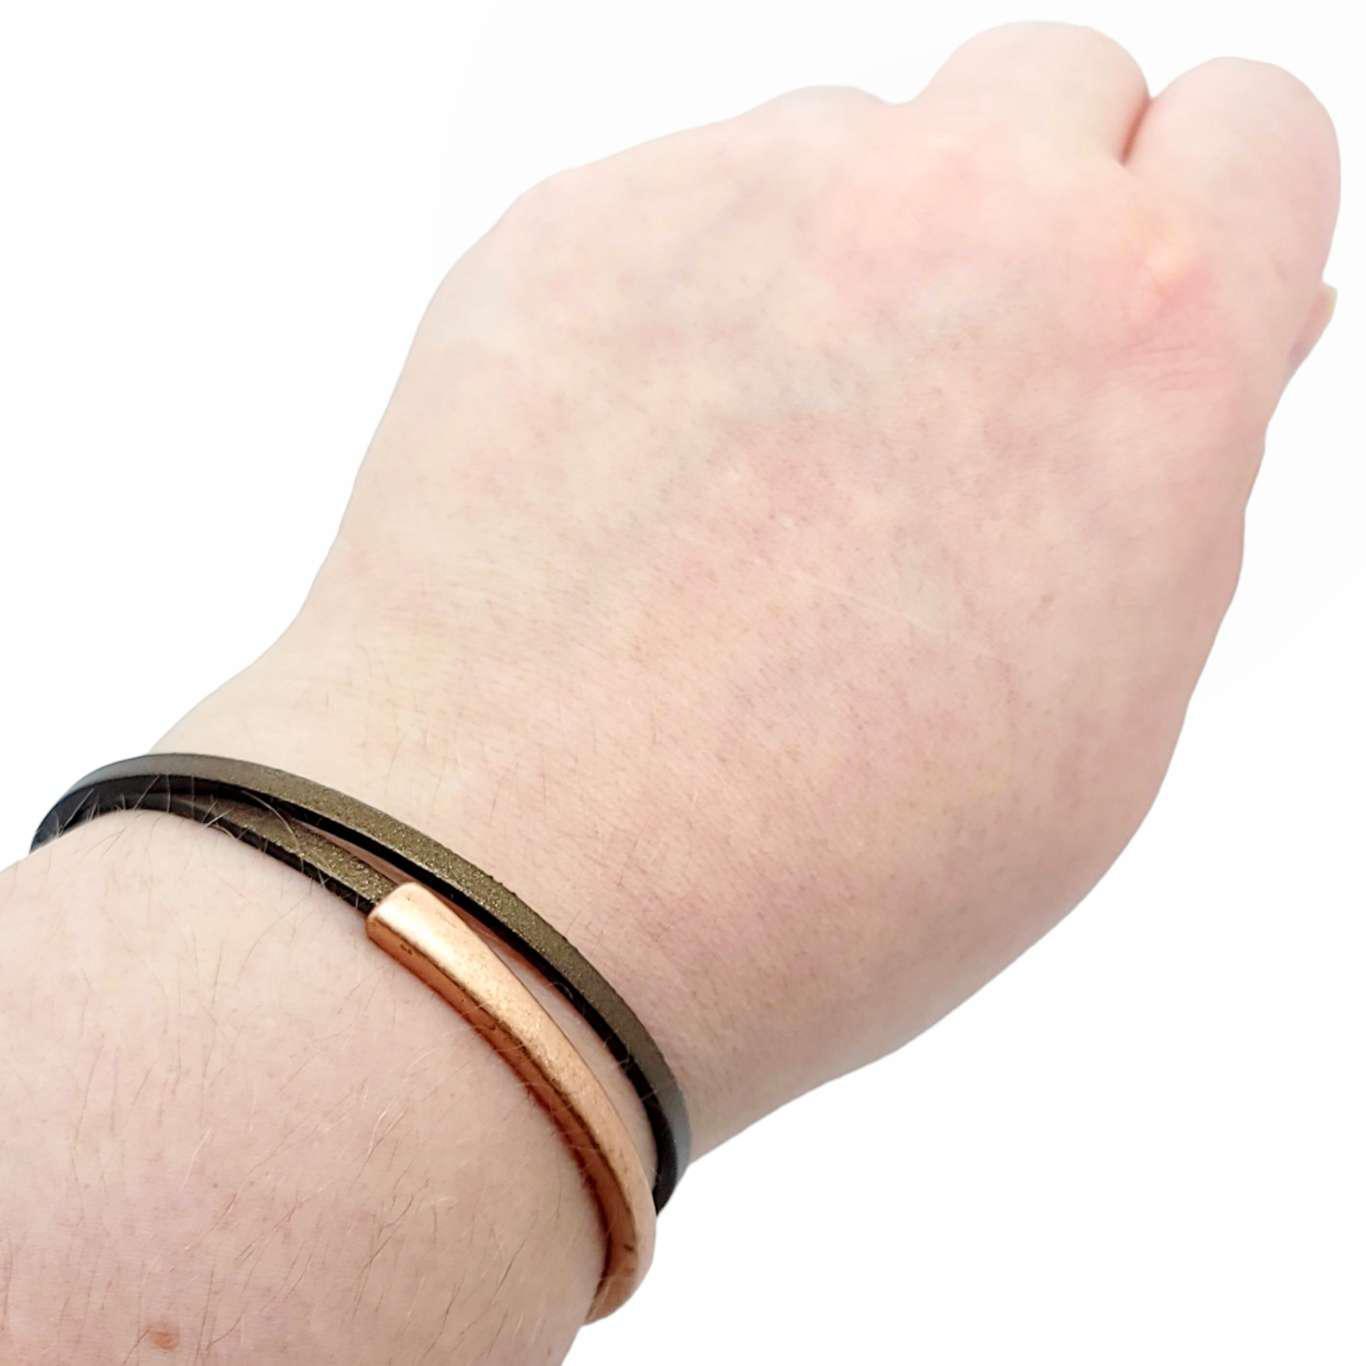 Bracelet - Skinny Breakaway in Olive Champagne Leather with Copper (7in) by Diana Kauffman Designs